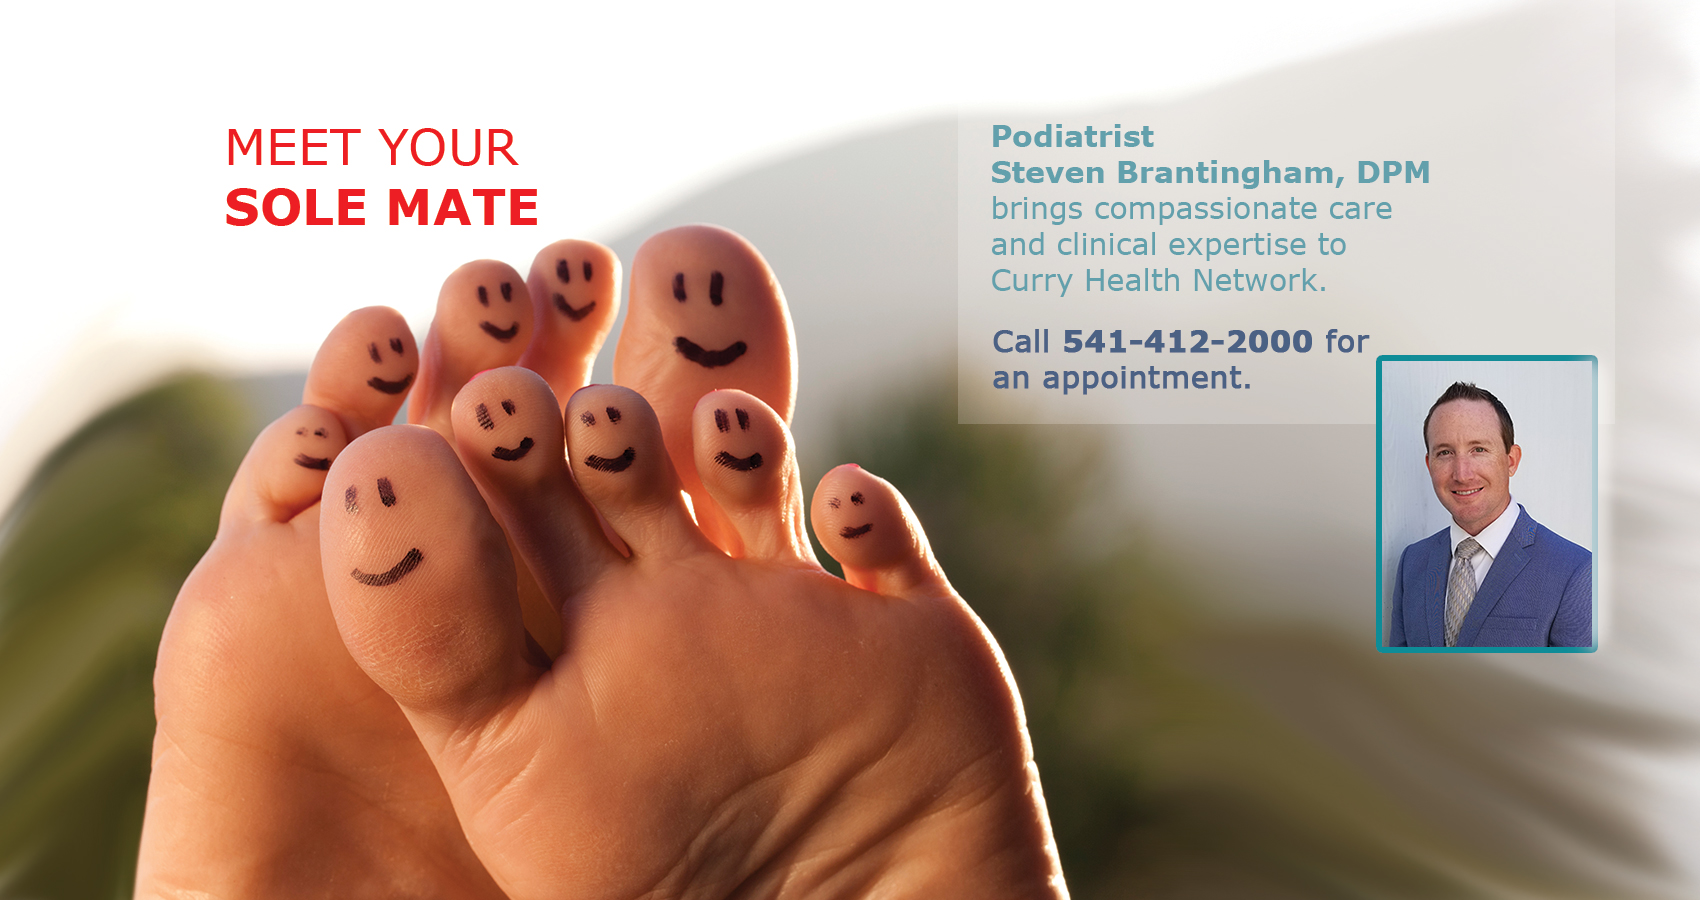 Meet your "Sole" Mate. Podiatrist Steven Brantingham, DPM brings compassionate care and clinical expertise to Curry Health Network.
Call 541-412-2000 for an appointment.